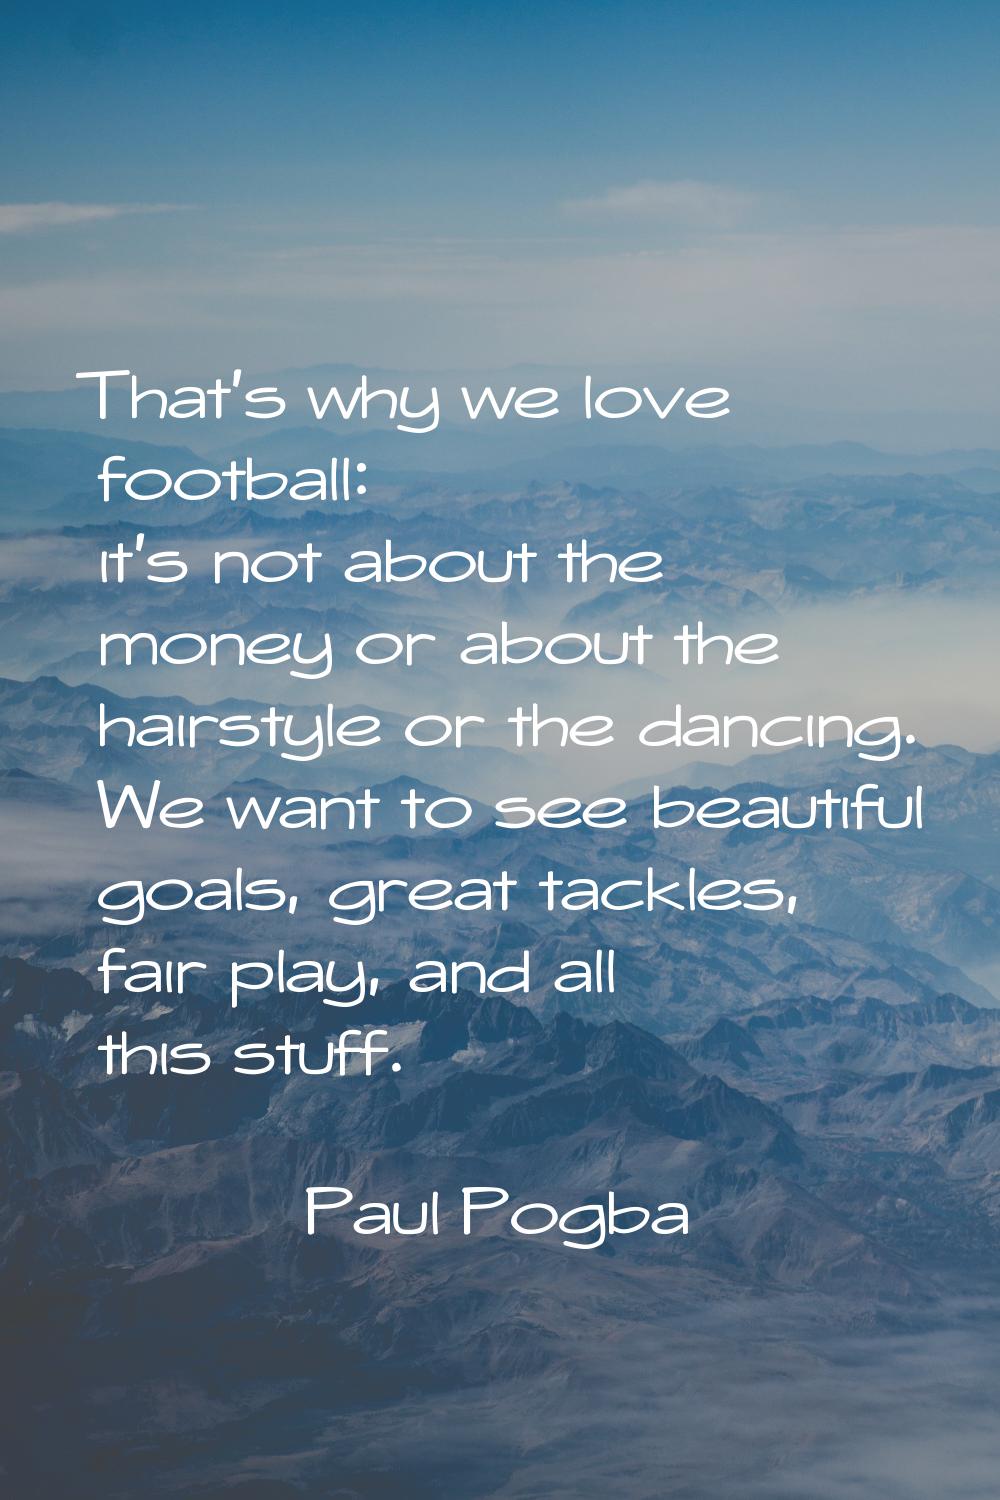 That's why we love football: it's not about the money or about the hairstyle or the dancing. We wan